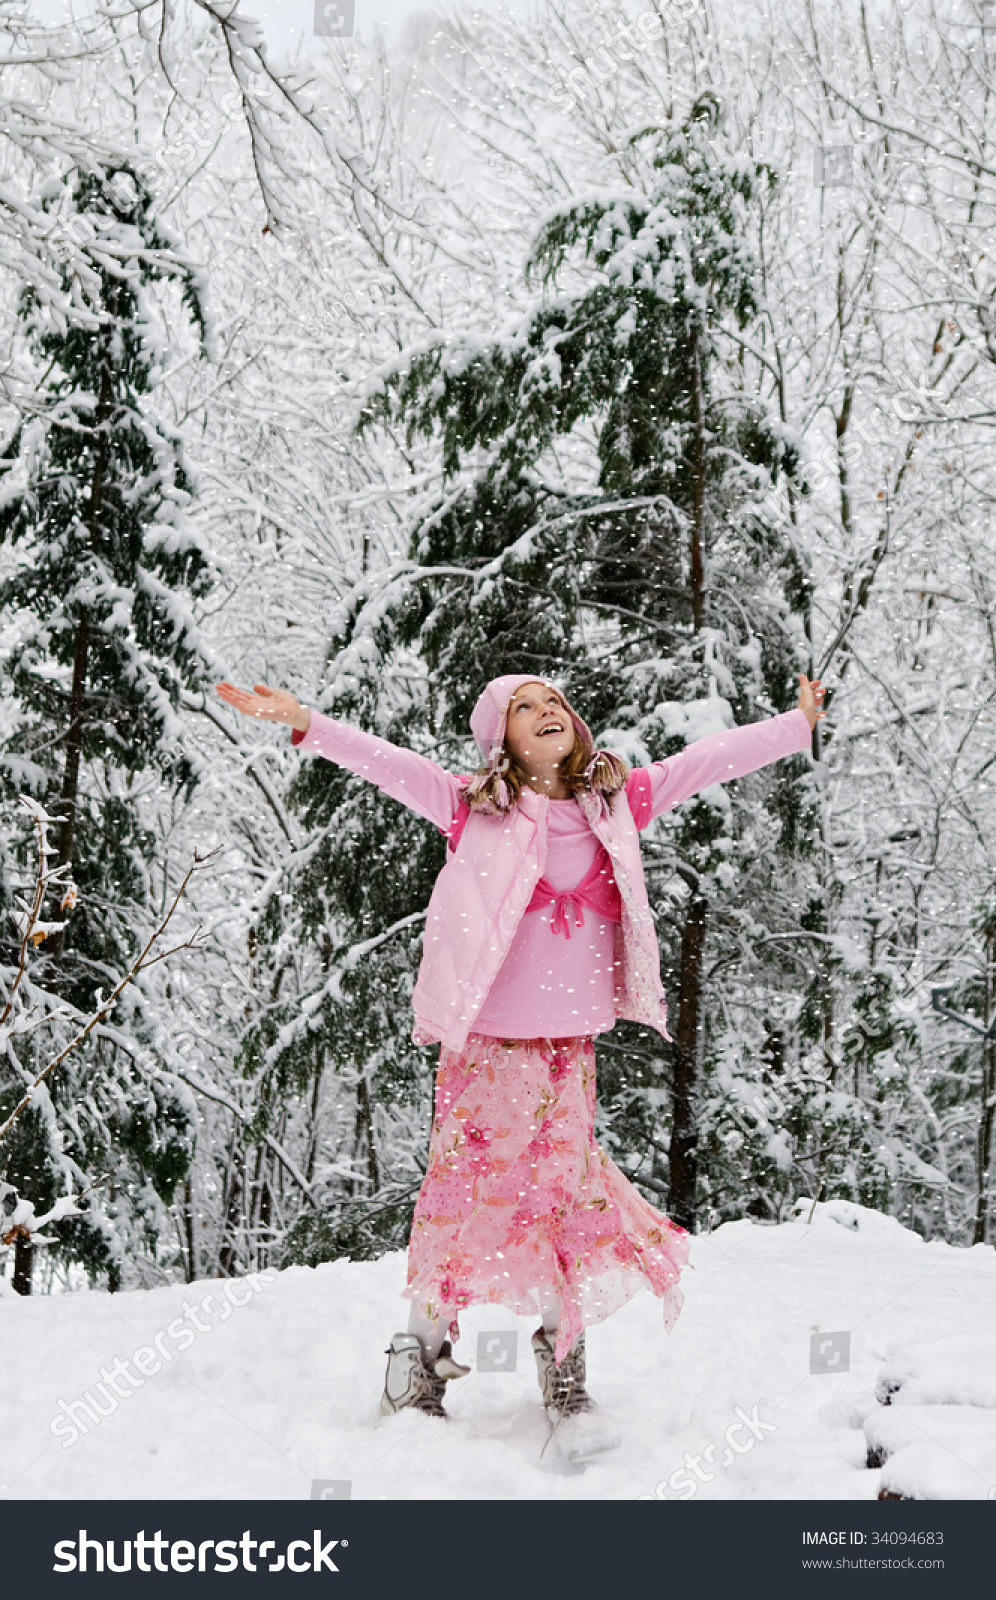 Girl Wearing Pink Dancing In The Snow Stock Photo 34094683 : Shutterstock